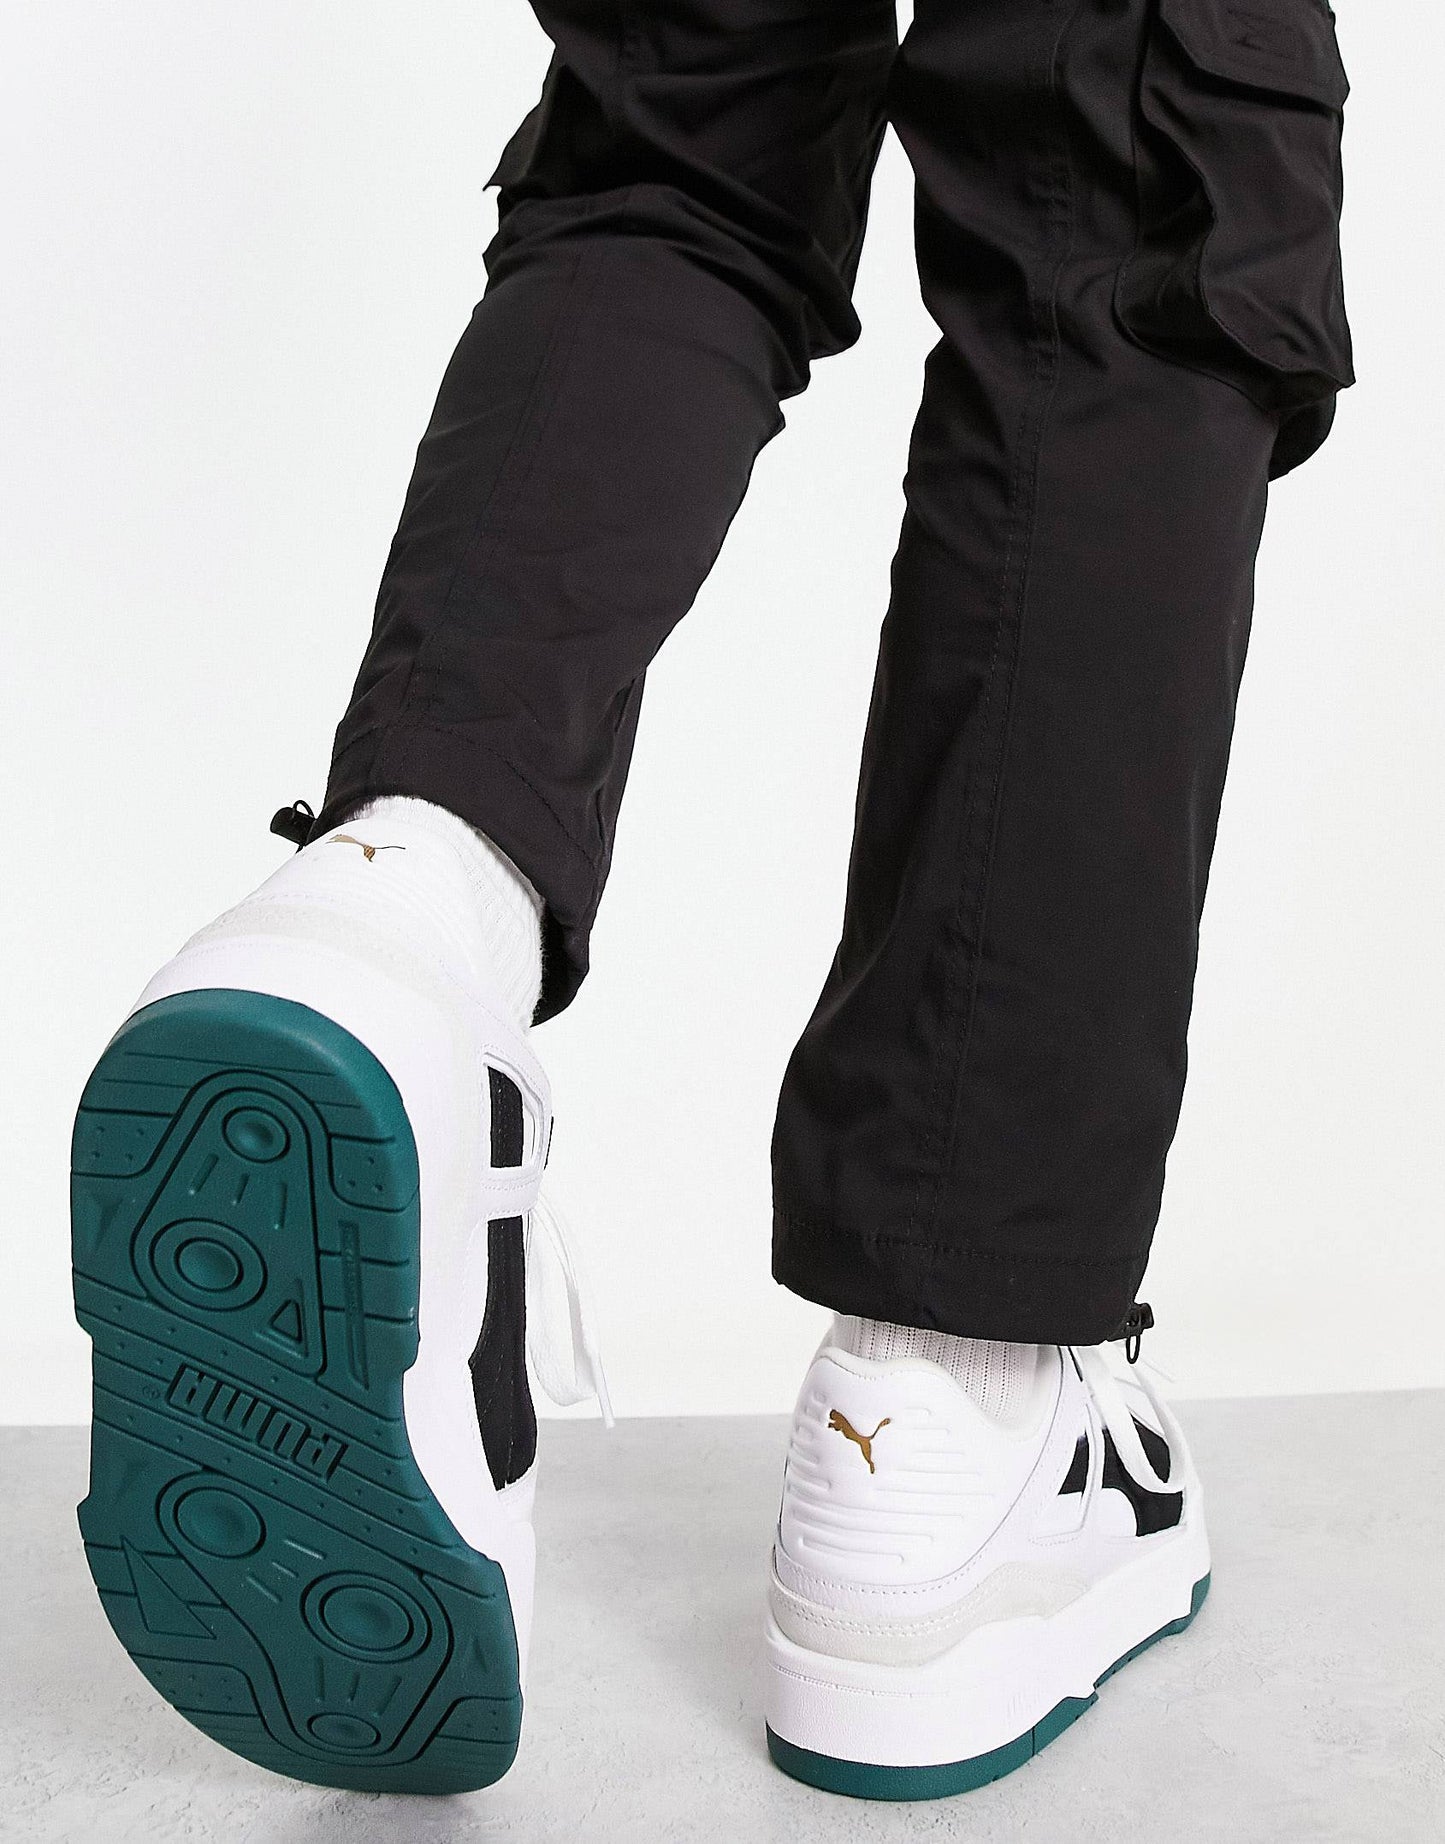 Puma slipstream trainers in white with black and green suede detail